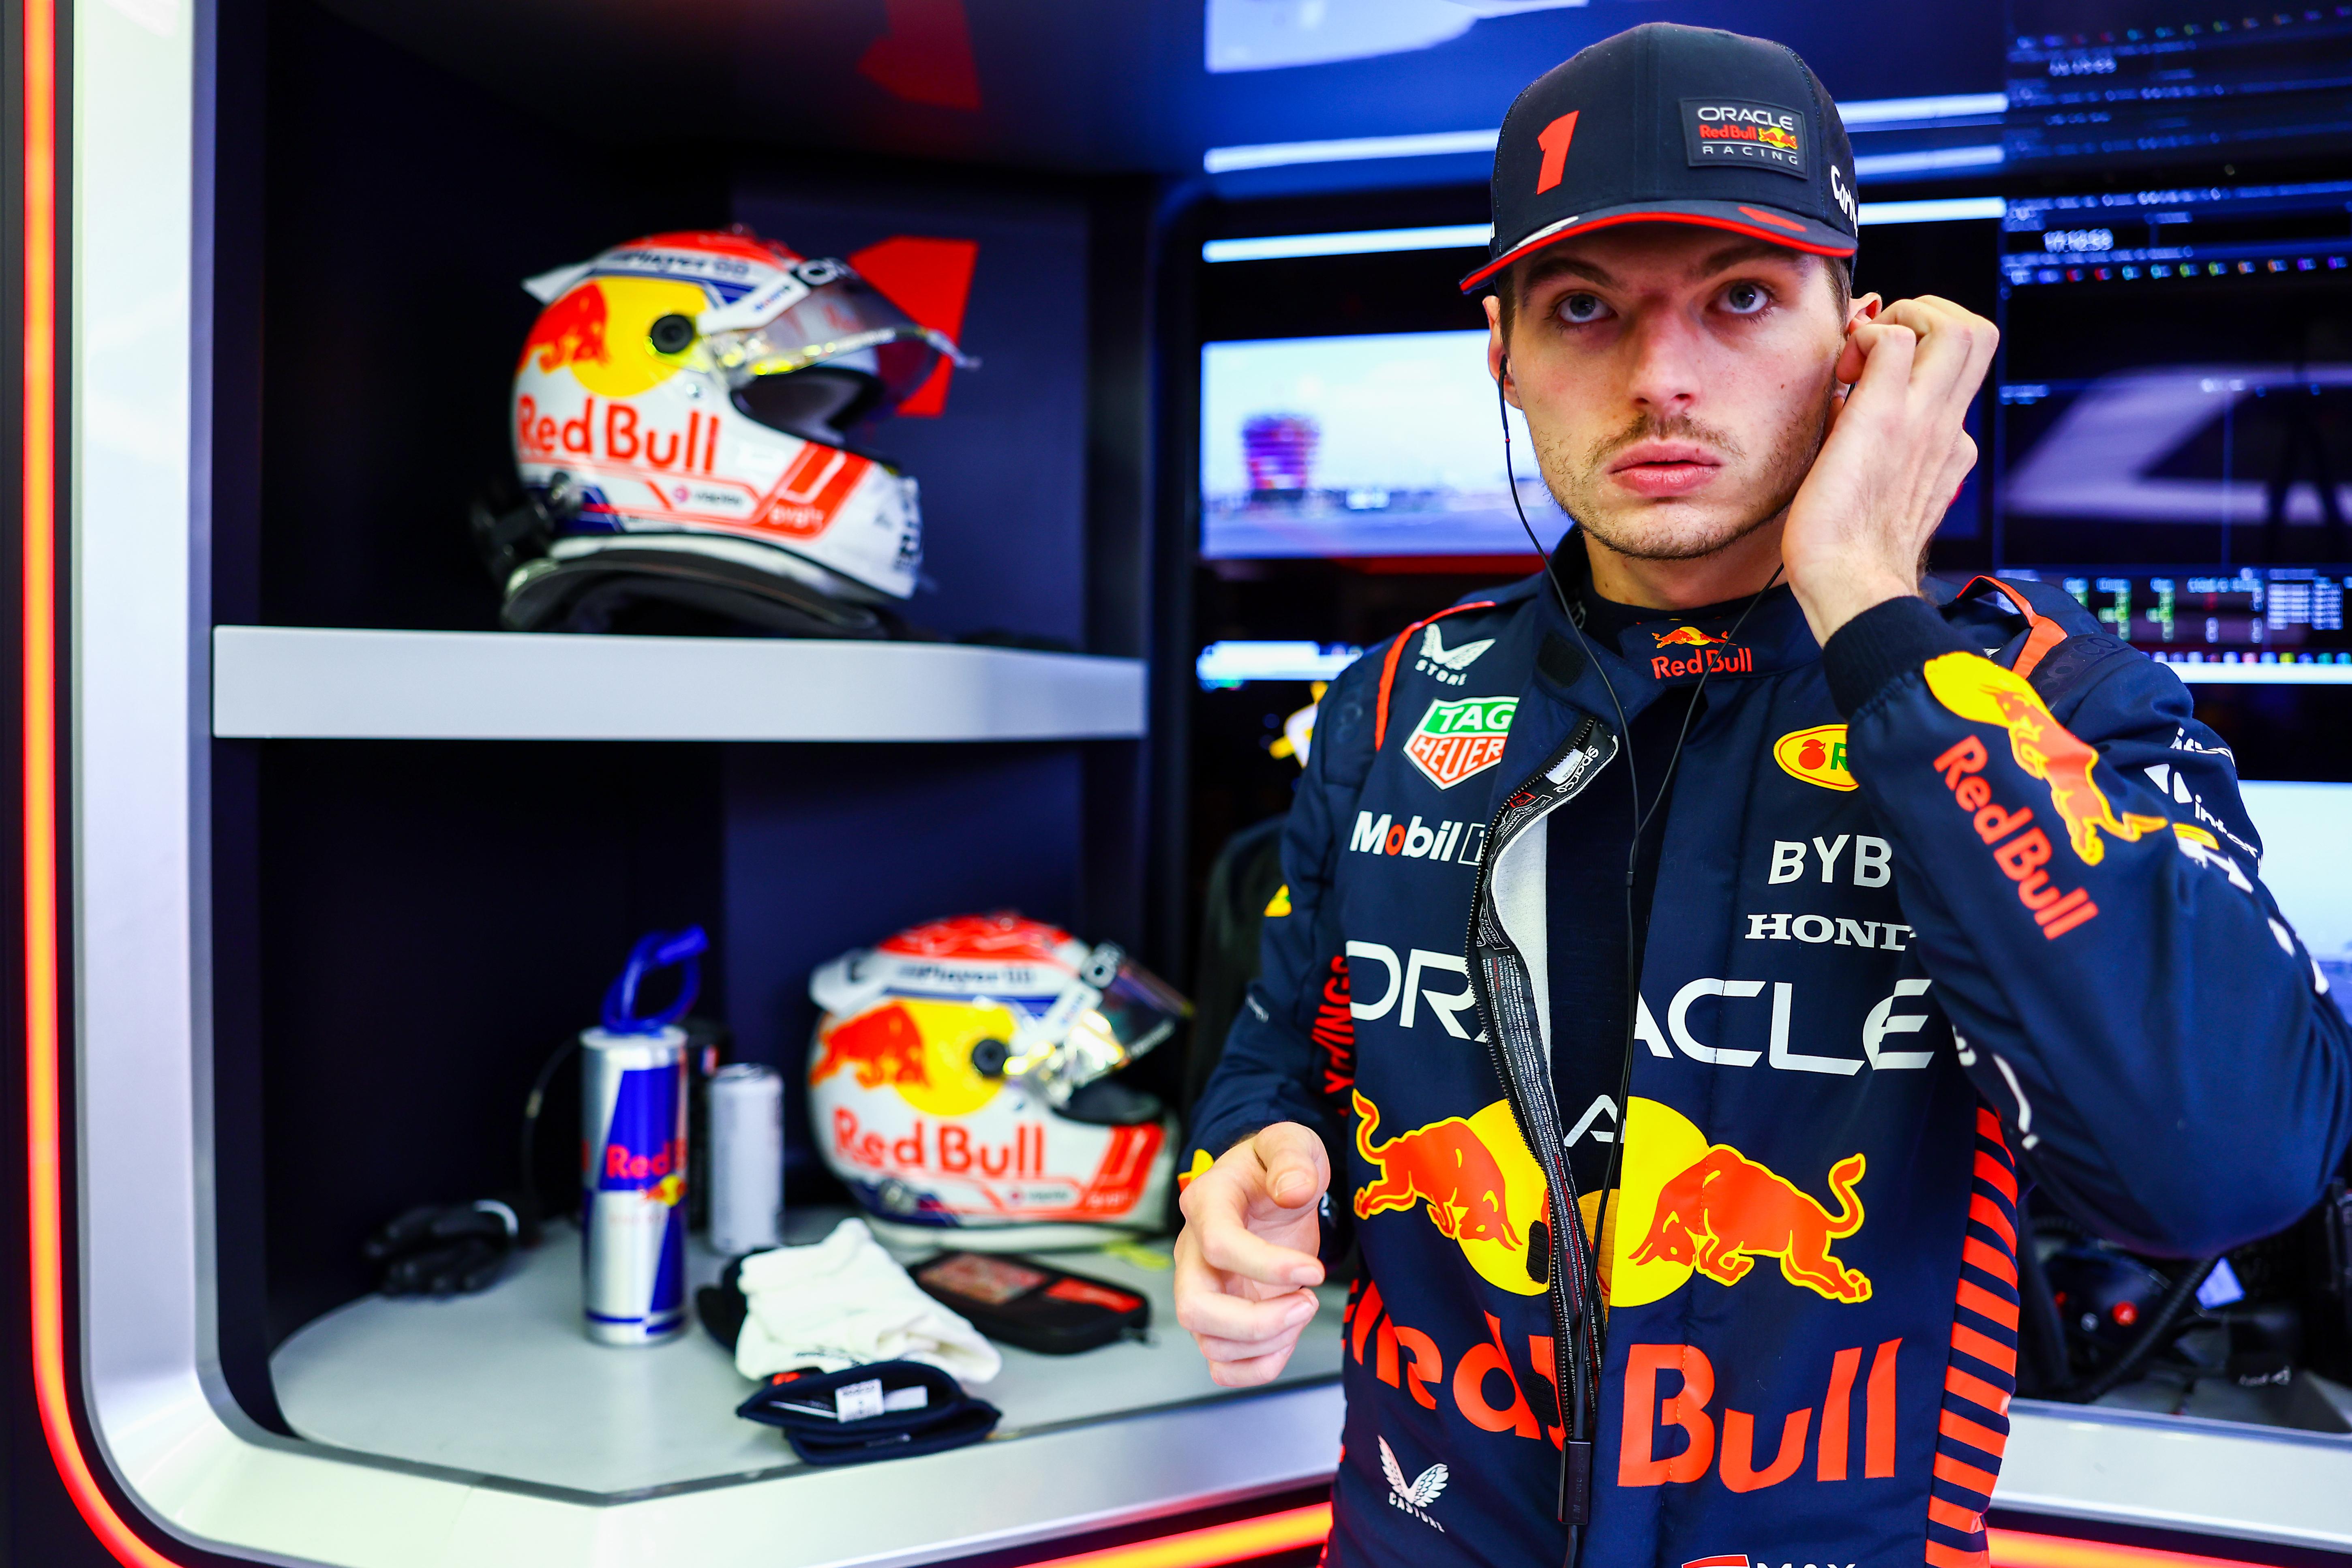 Verstappen surrounded by Red Bull logo'd gear in his racing uniform, looking stern-faced with his left hand to his ear